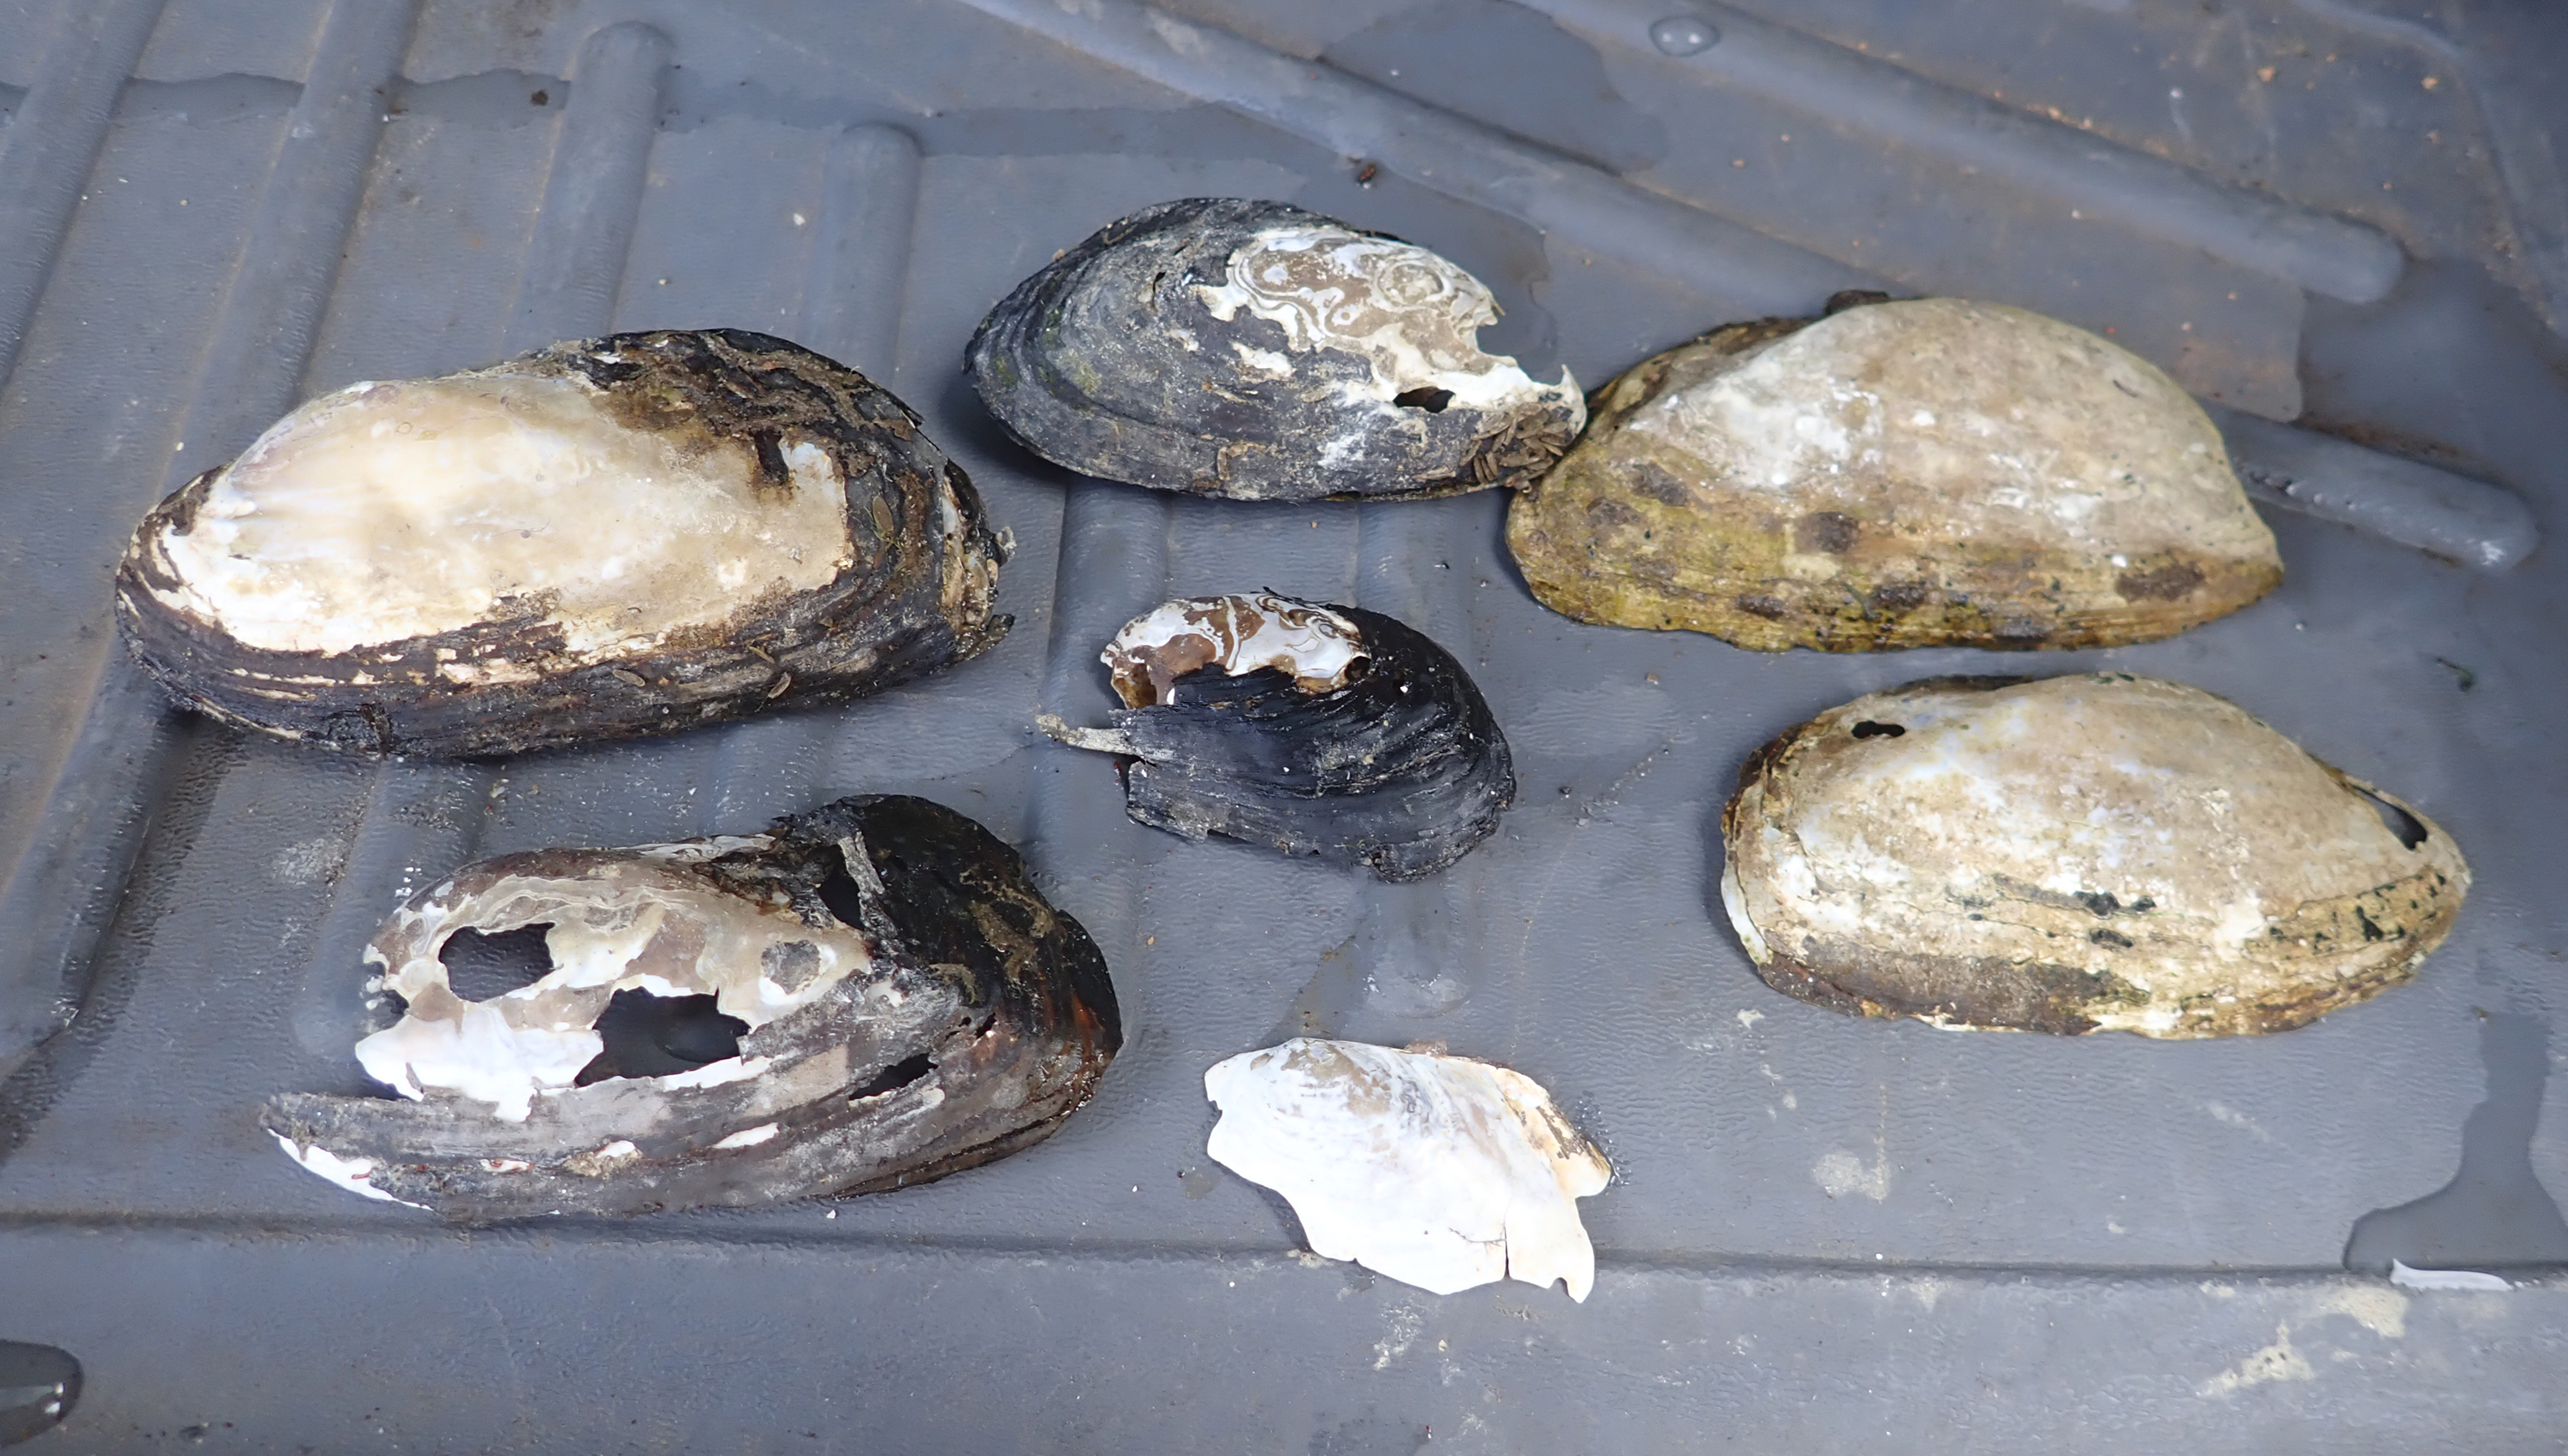 Laid out in the bed of a pickup truck, the brown-and-white weathered shells and shell fragments are the only signs that western ridged mussels where once abundant in this river.